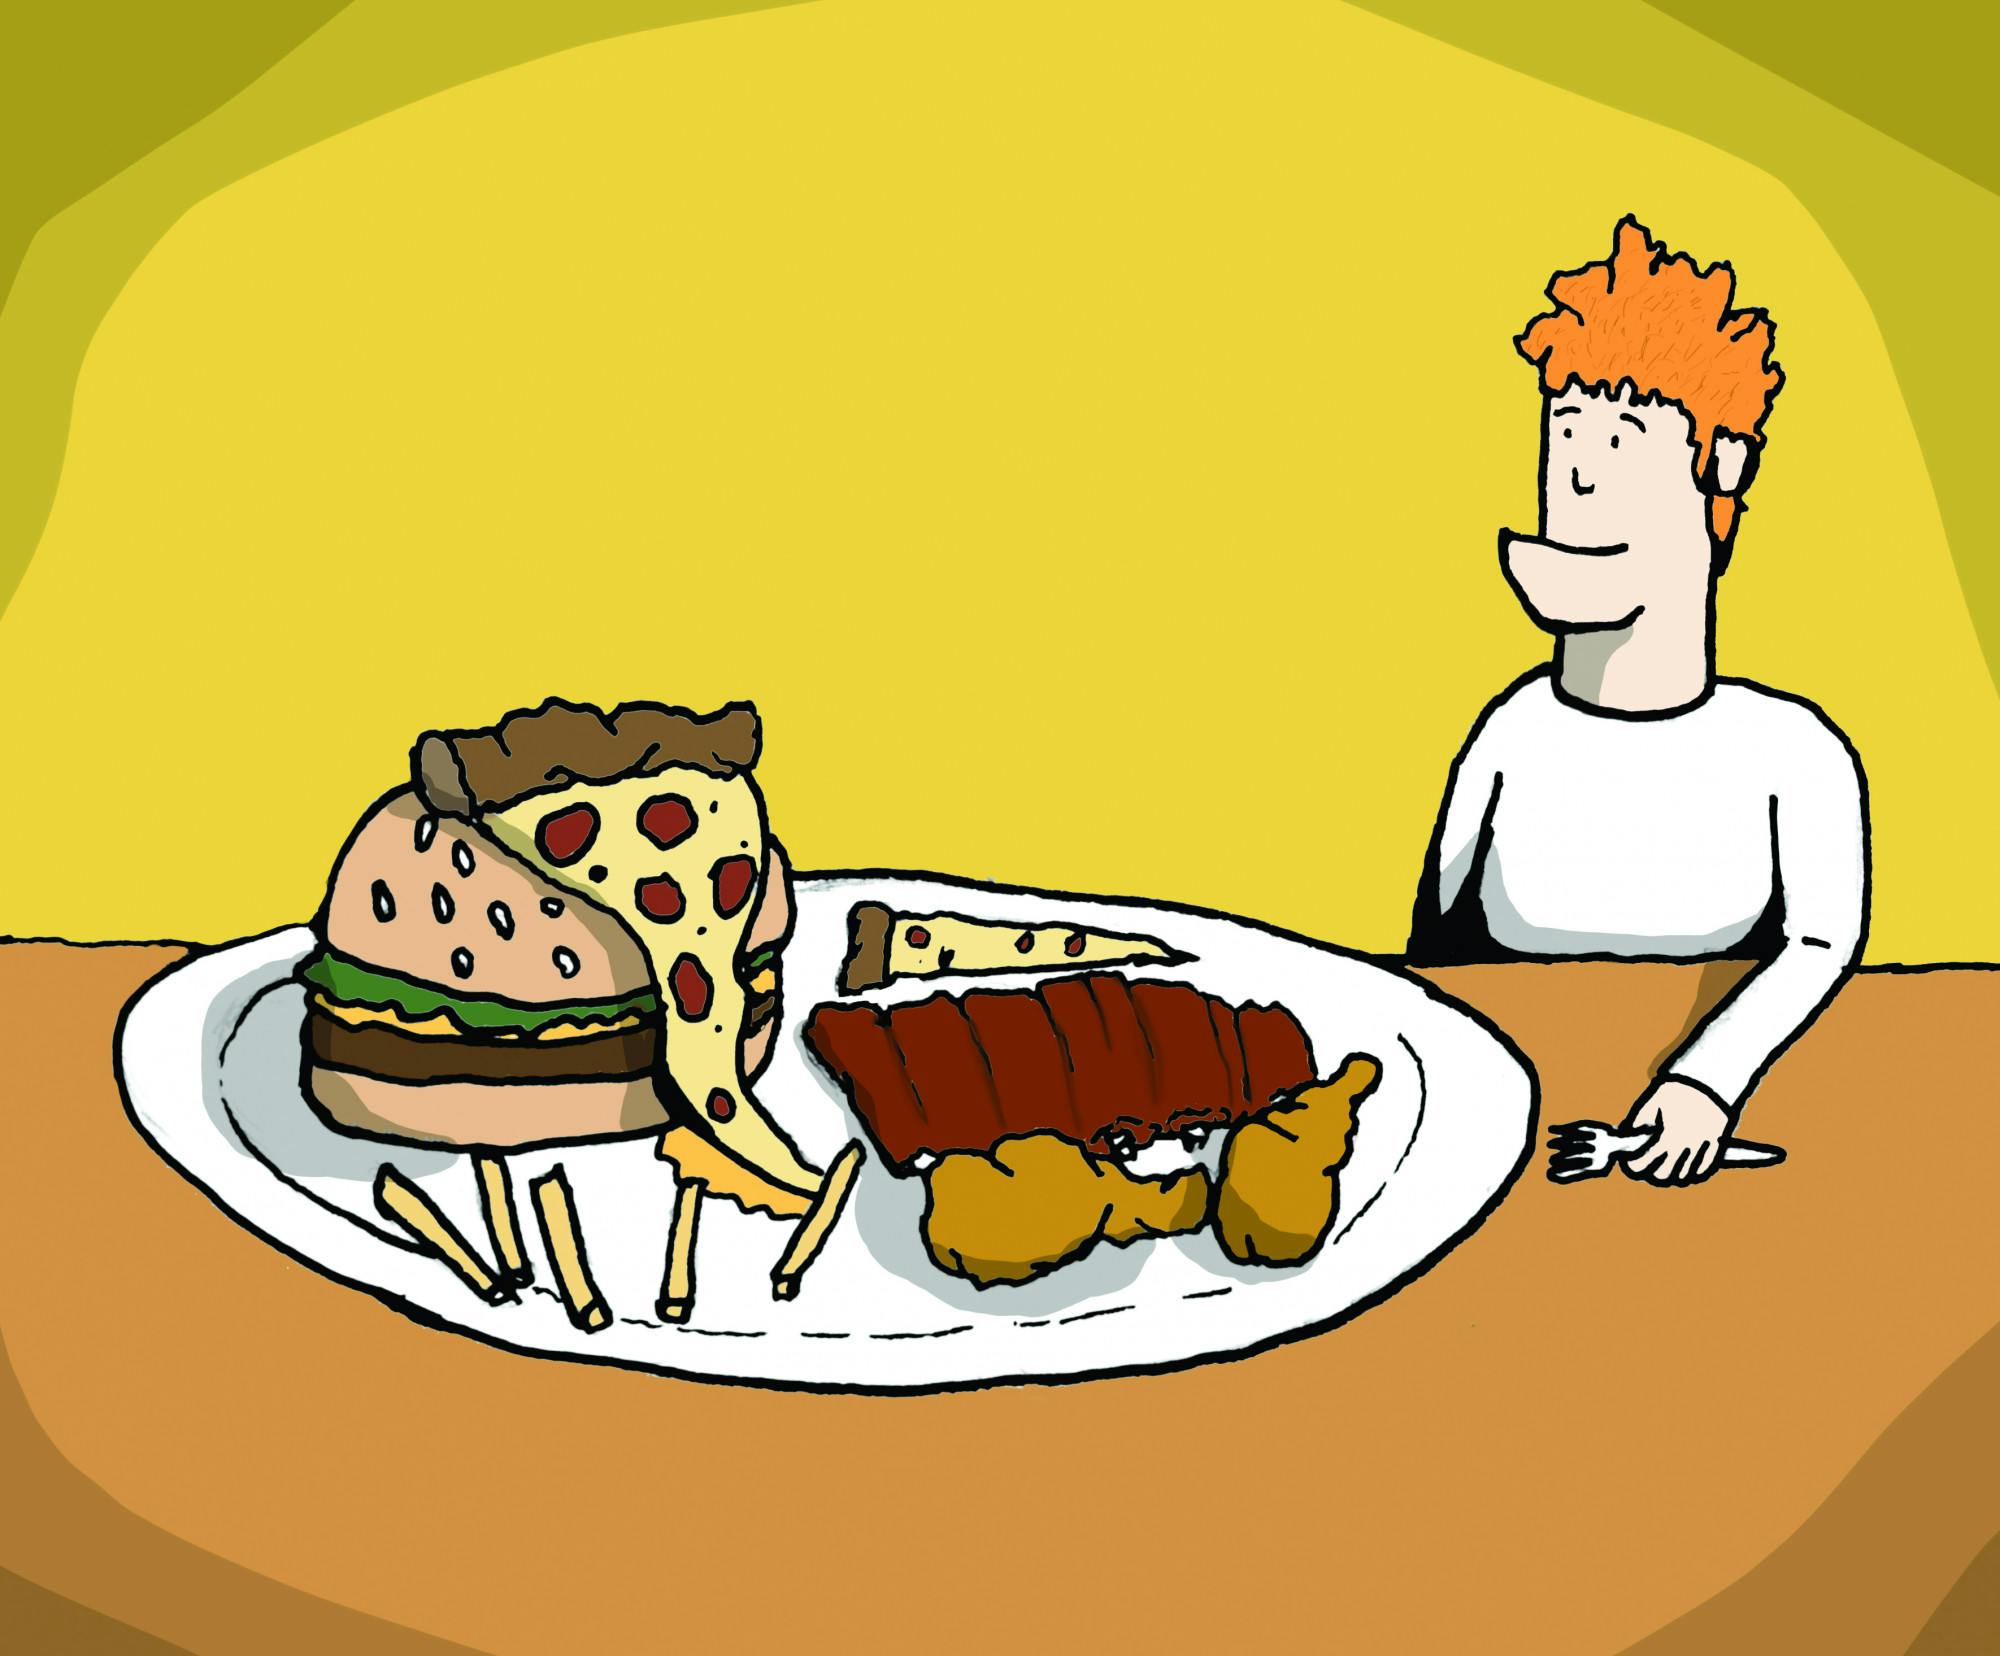 Illustration depicts a guy with various junk foods on a table. The backround is yellow and the table is brown.